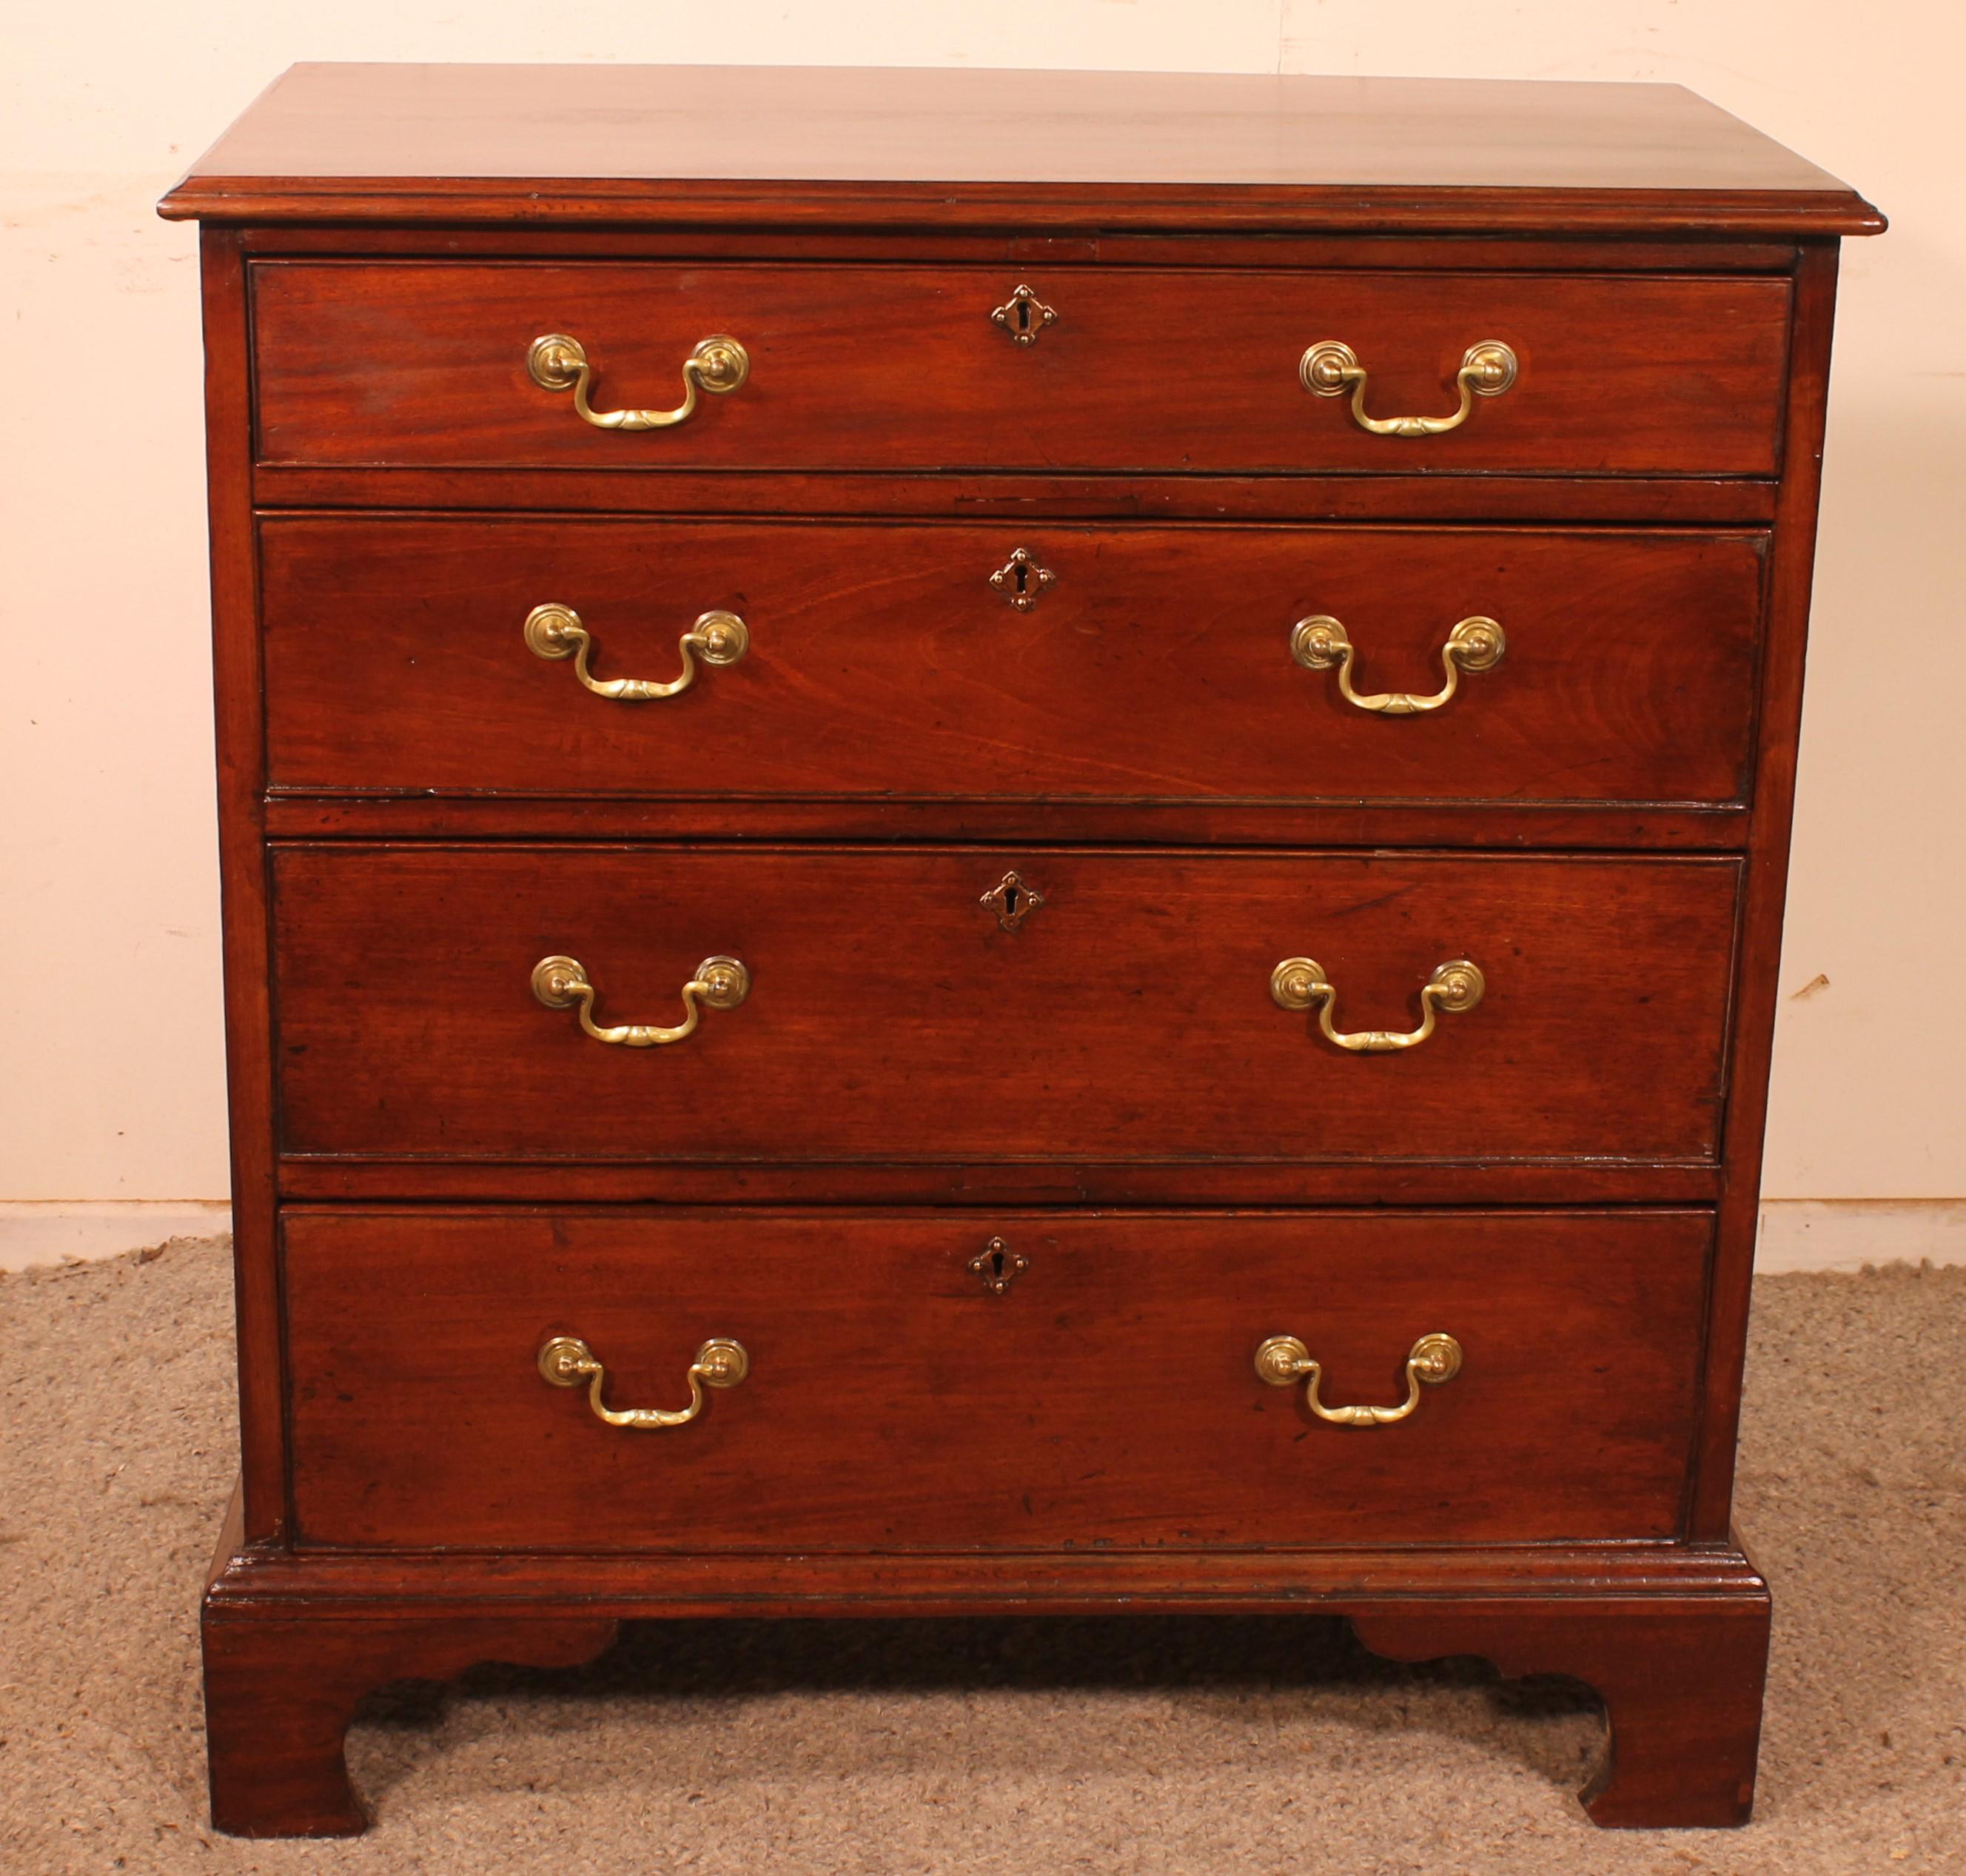 a fine English 18th century mahogany chest of drawers

chest of drawers of small dimensions with very good quality mahogany flame

Very nice proportions and beautiful molding on the top

the chest of drawers has a superb patina and is in